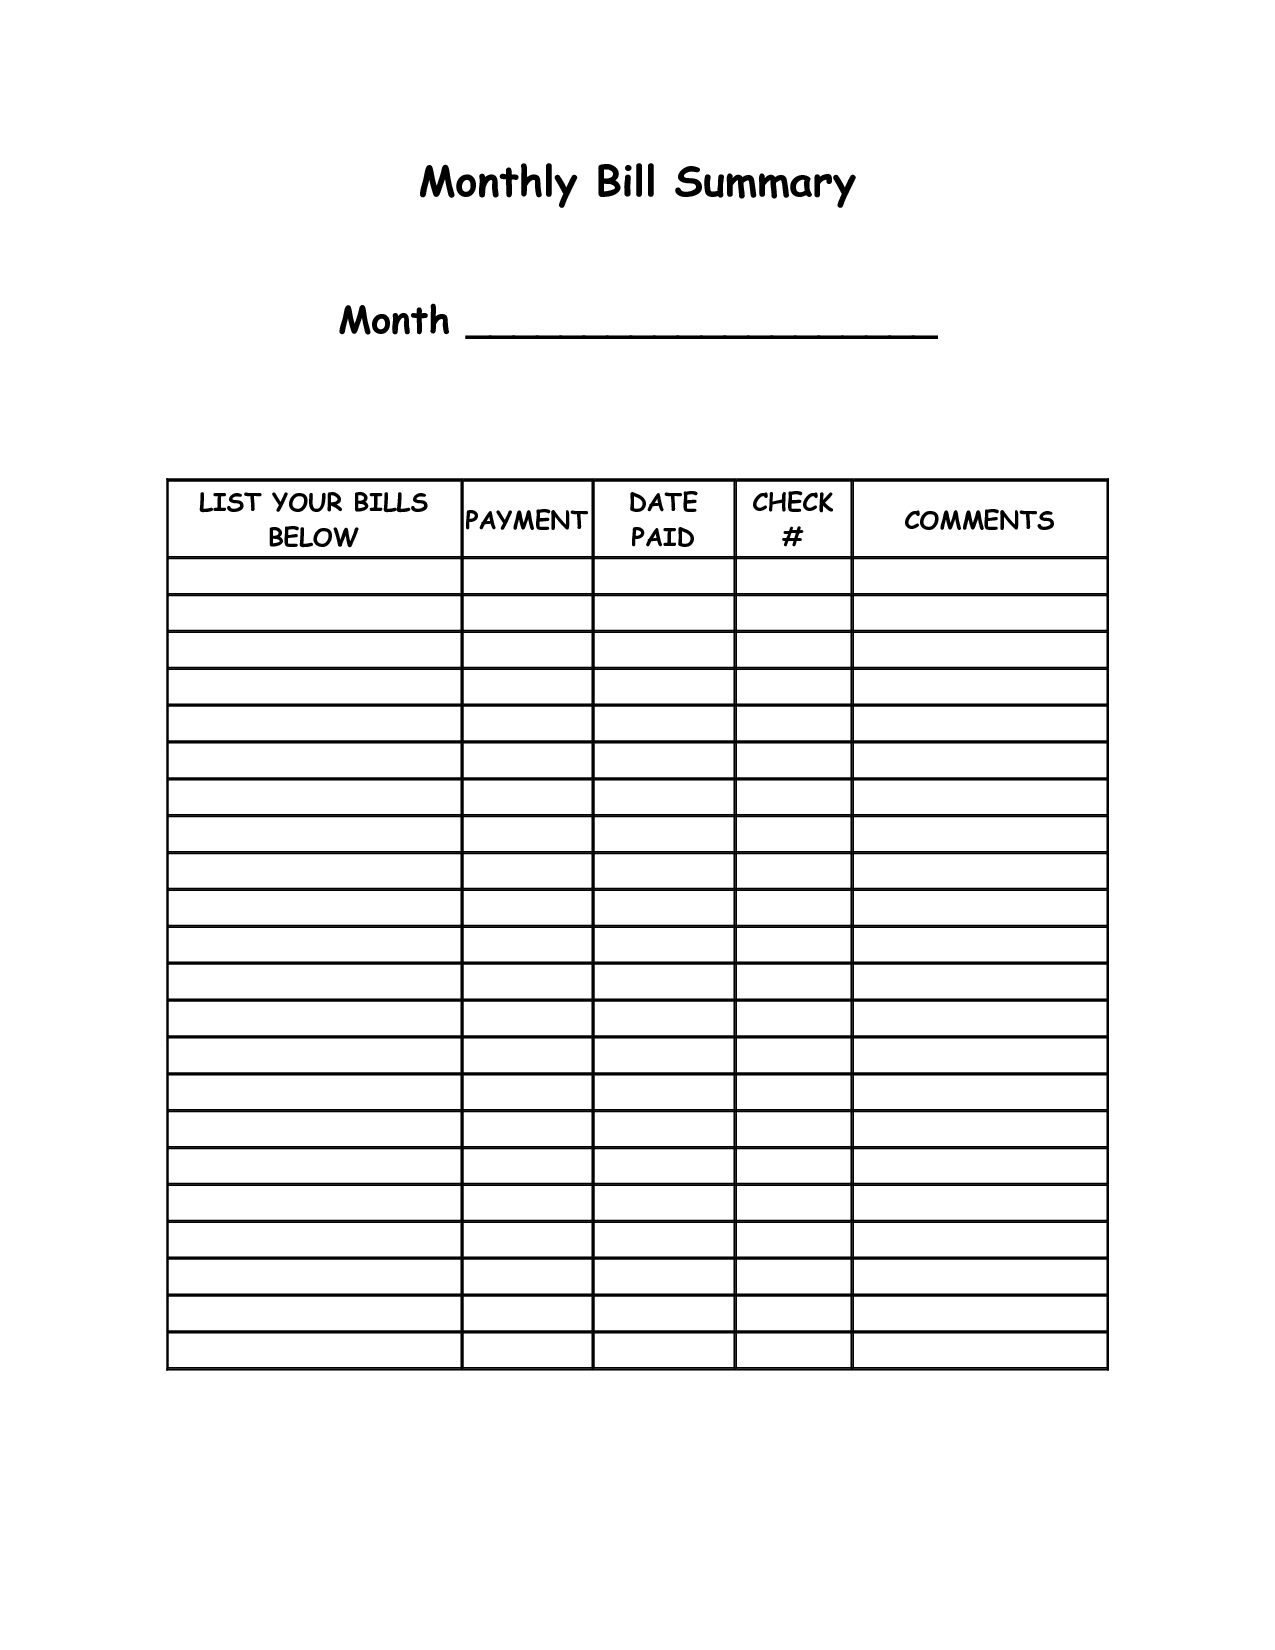 Monthly Bill Summary Doc | Organization | Organizing Monthly  Free Printable Monthly Payment Sheet